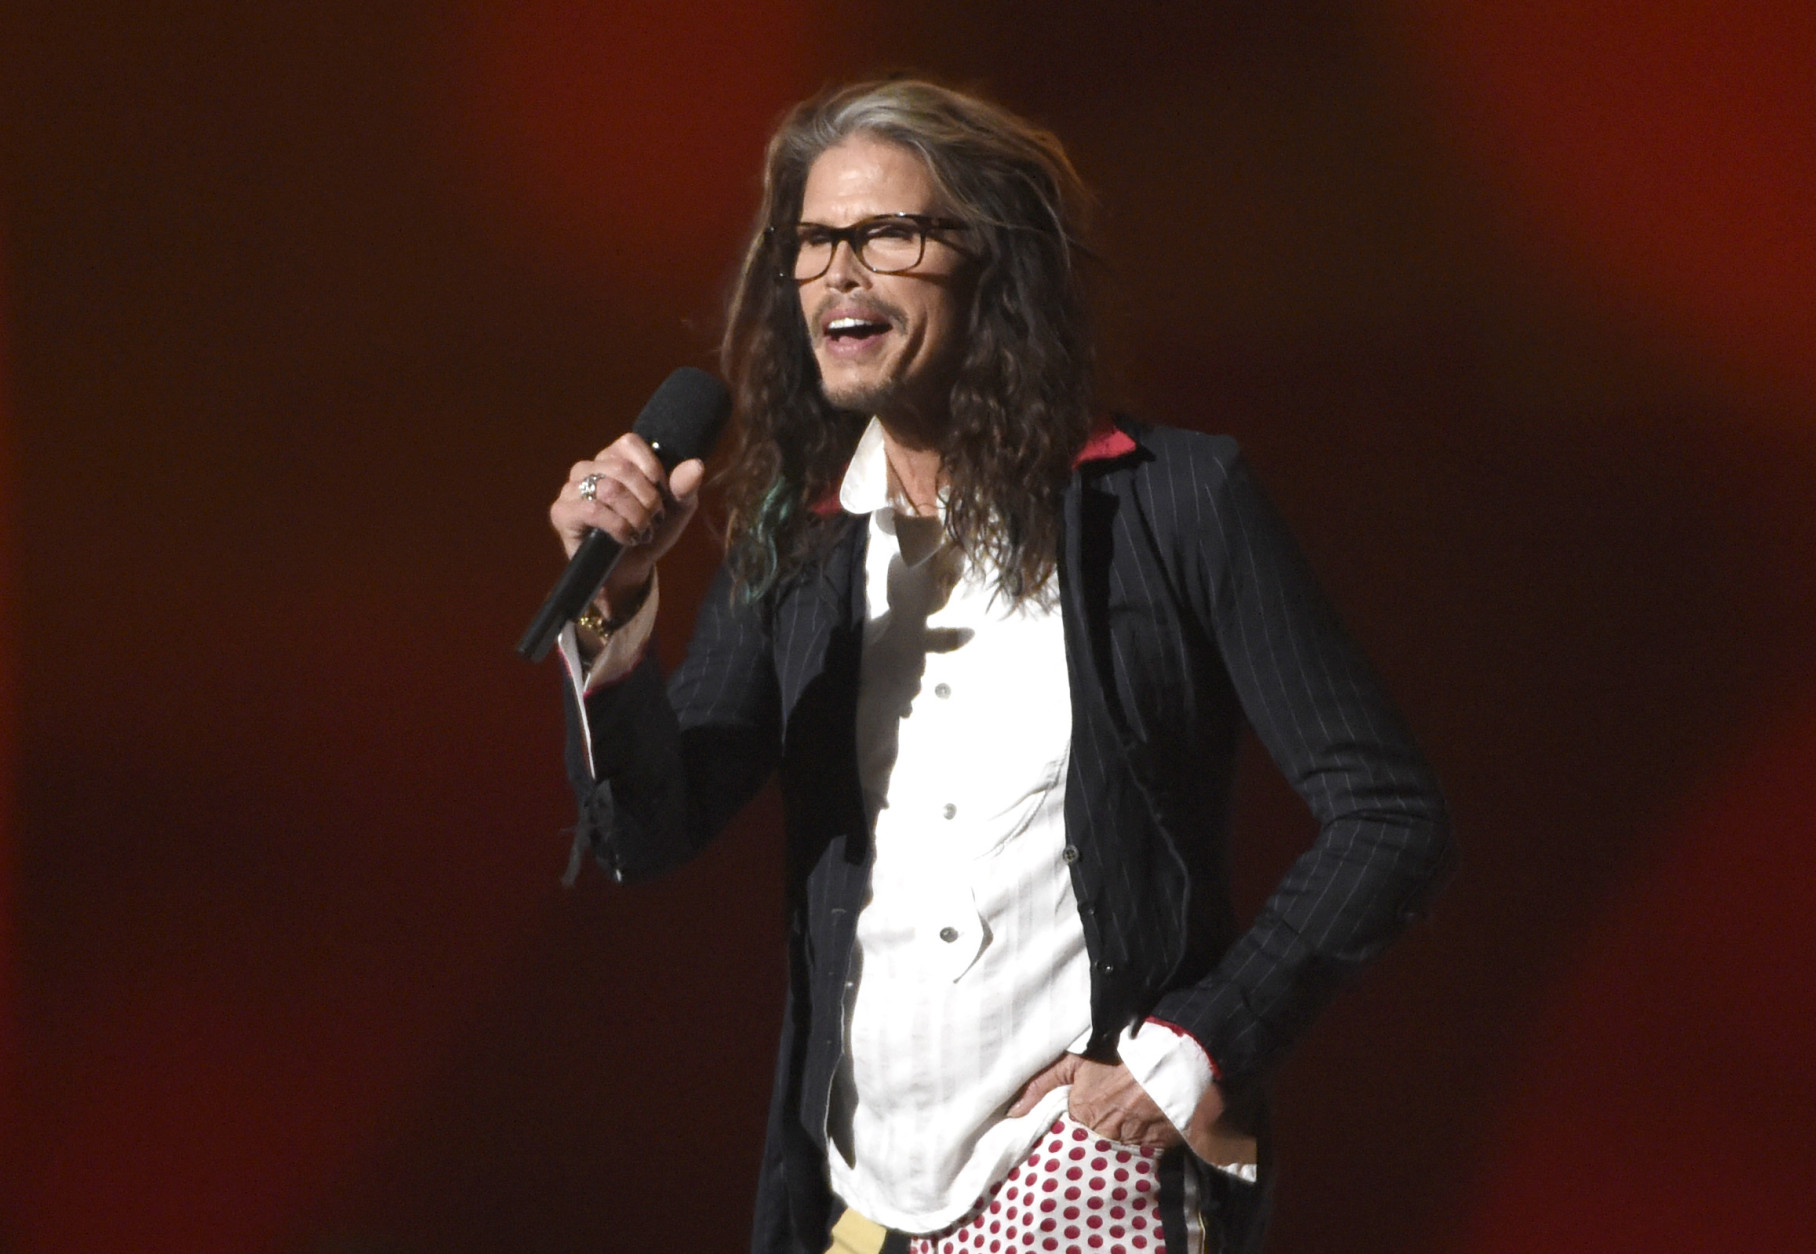 Steven Tyler speaks on stage at the 50th annual Academy of Country Music Awards at AT&amp;T Stadium on Sunday, April 19, 2015, in Arlington, Texas. (Photo by Chris Pizzello/Invision/AP)